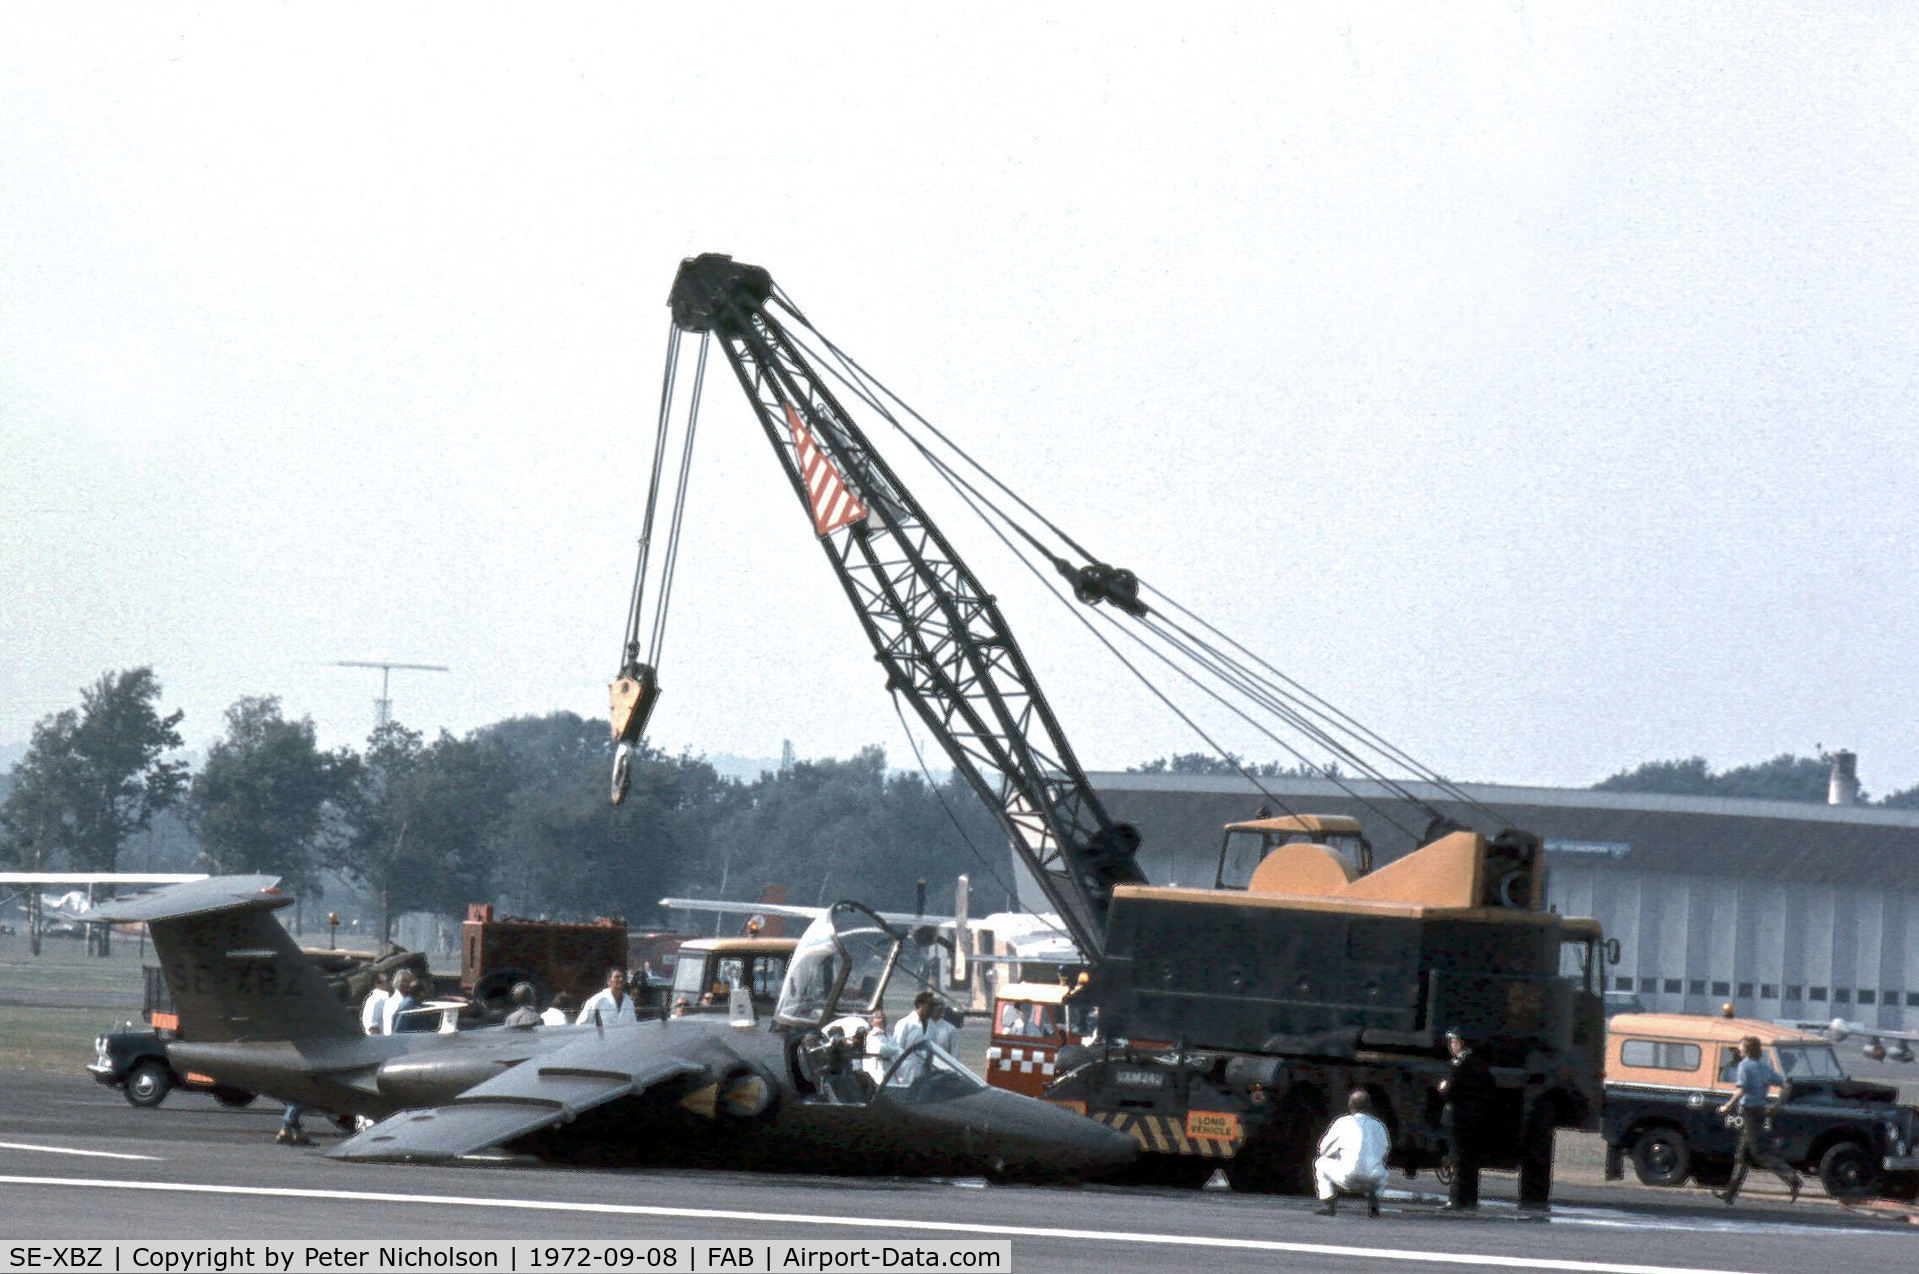 SE-XBZ, 1964 Saab 105XT C/N 105-2, Saab 105XT being recovered after a landing accident at the 1972 Farnborough Air Show, but the damage was slight and the aircraft flew again the next day !!